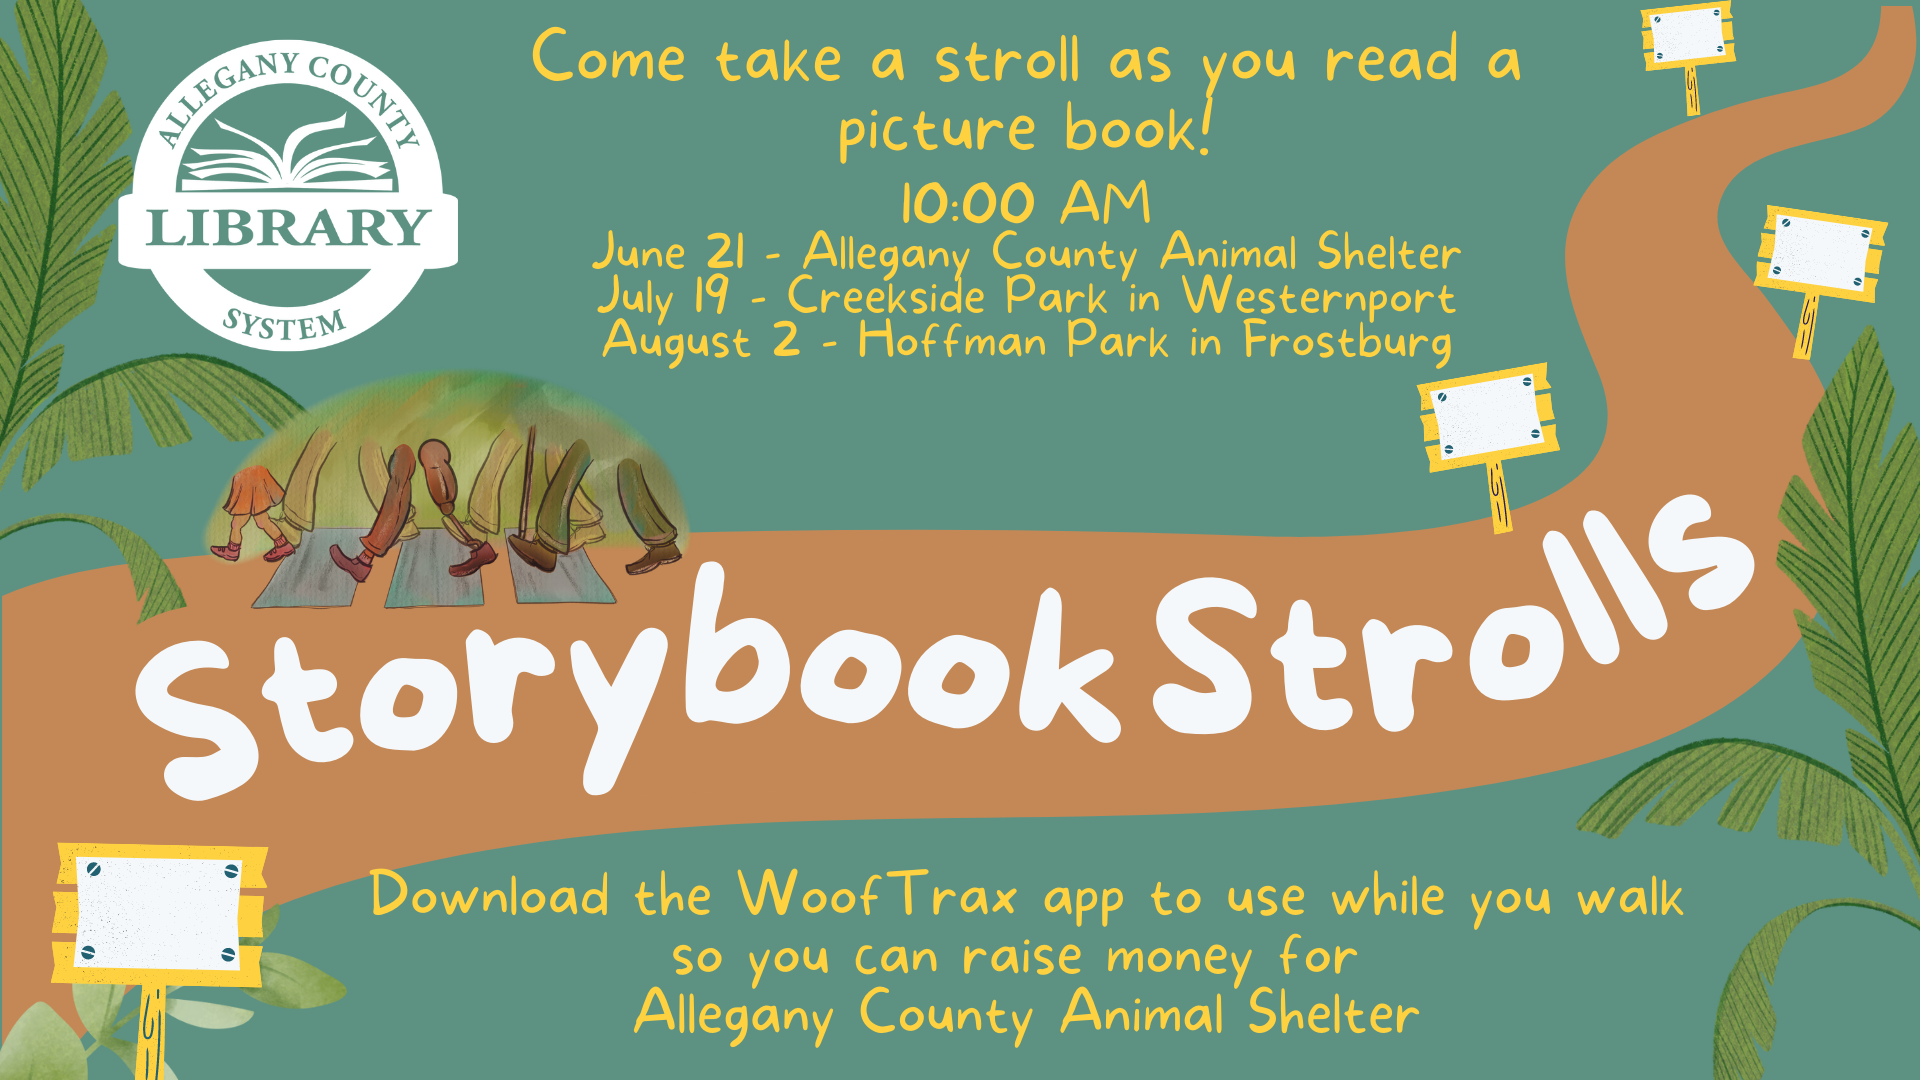 Storybook strolls graphic with information